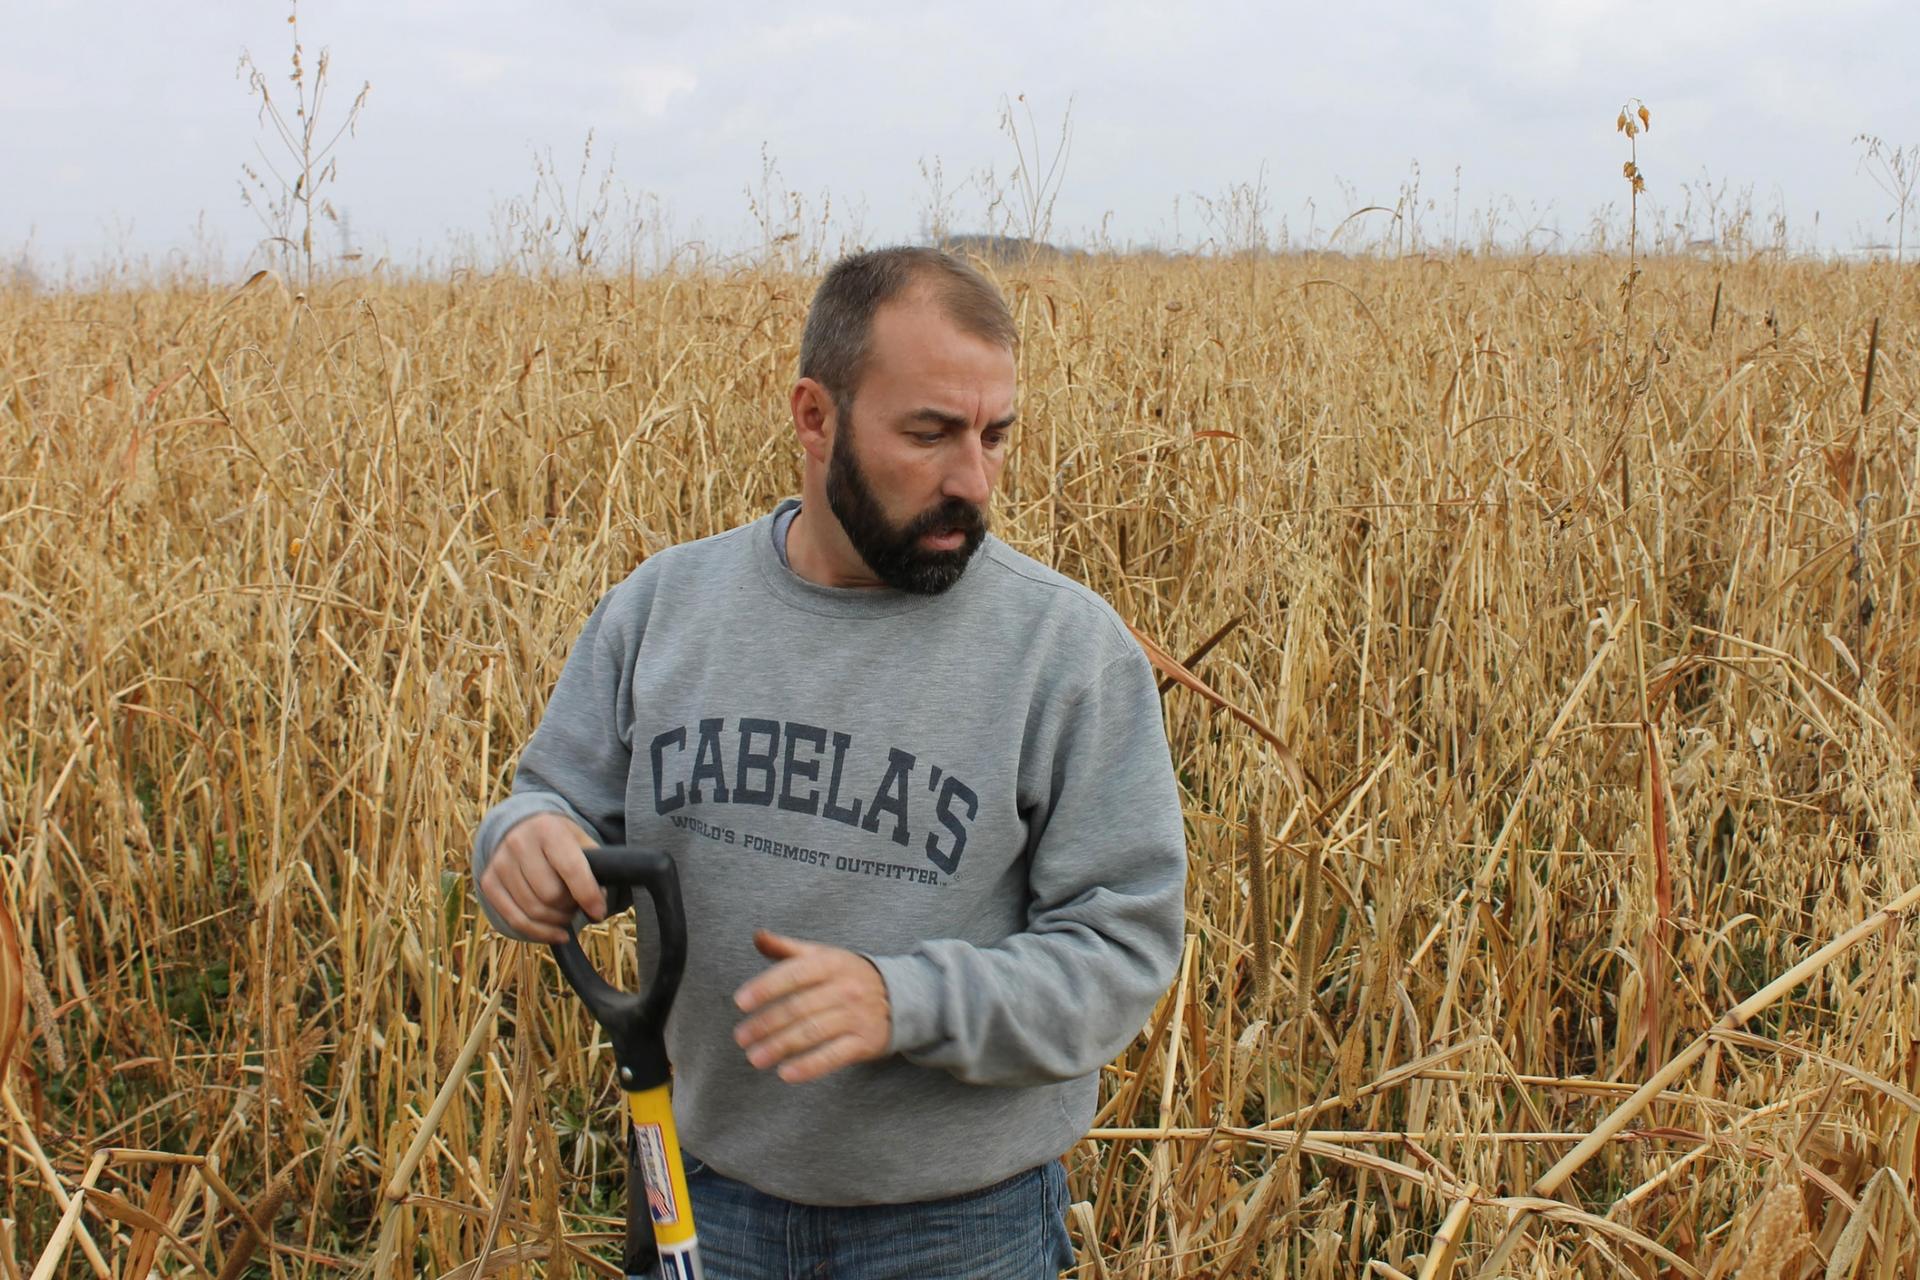 A man is shown wearing a Cabela's sweatshirt and holding a handled-tool.